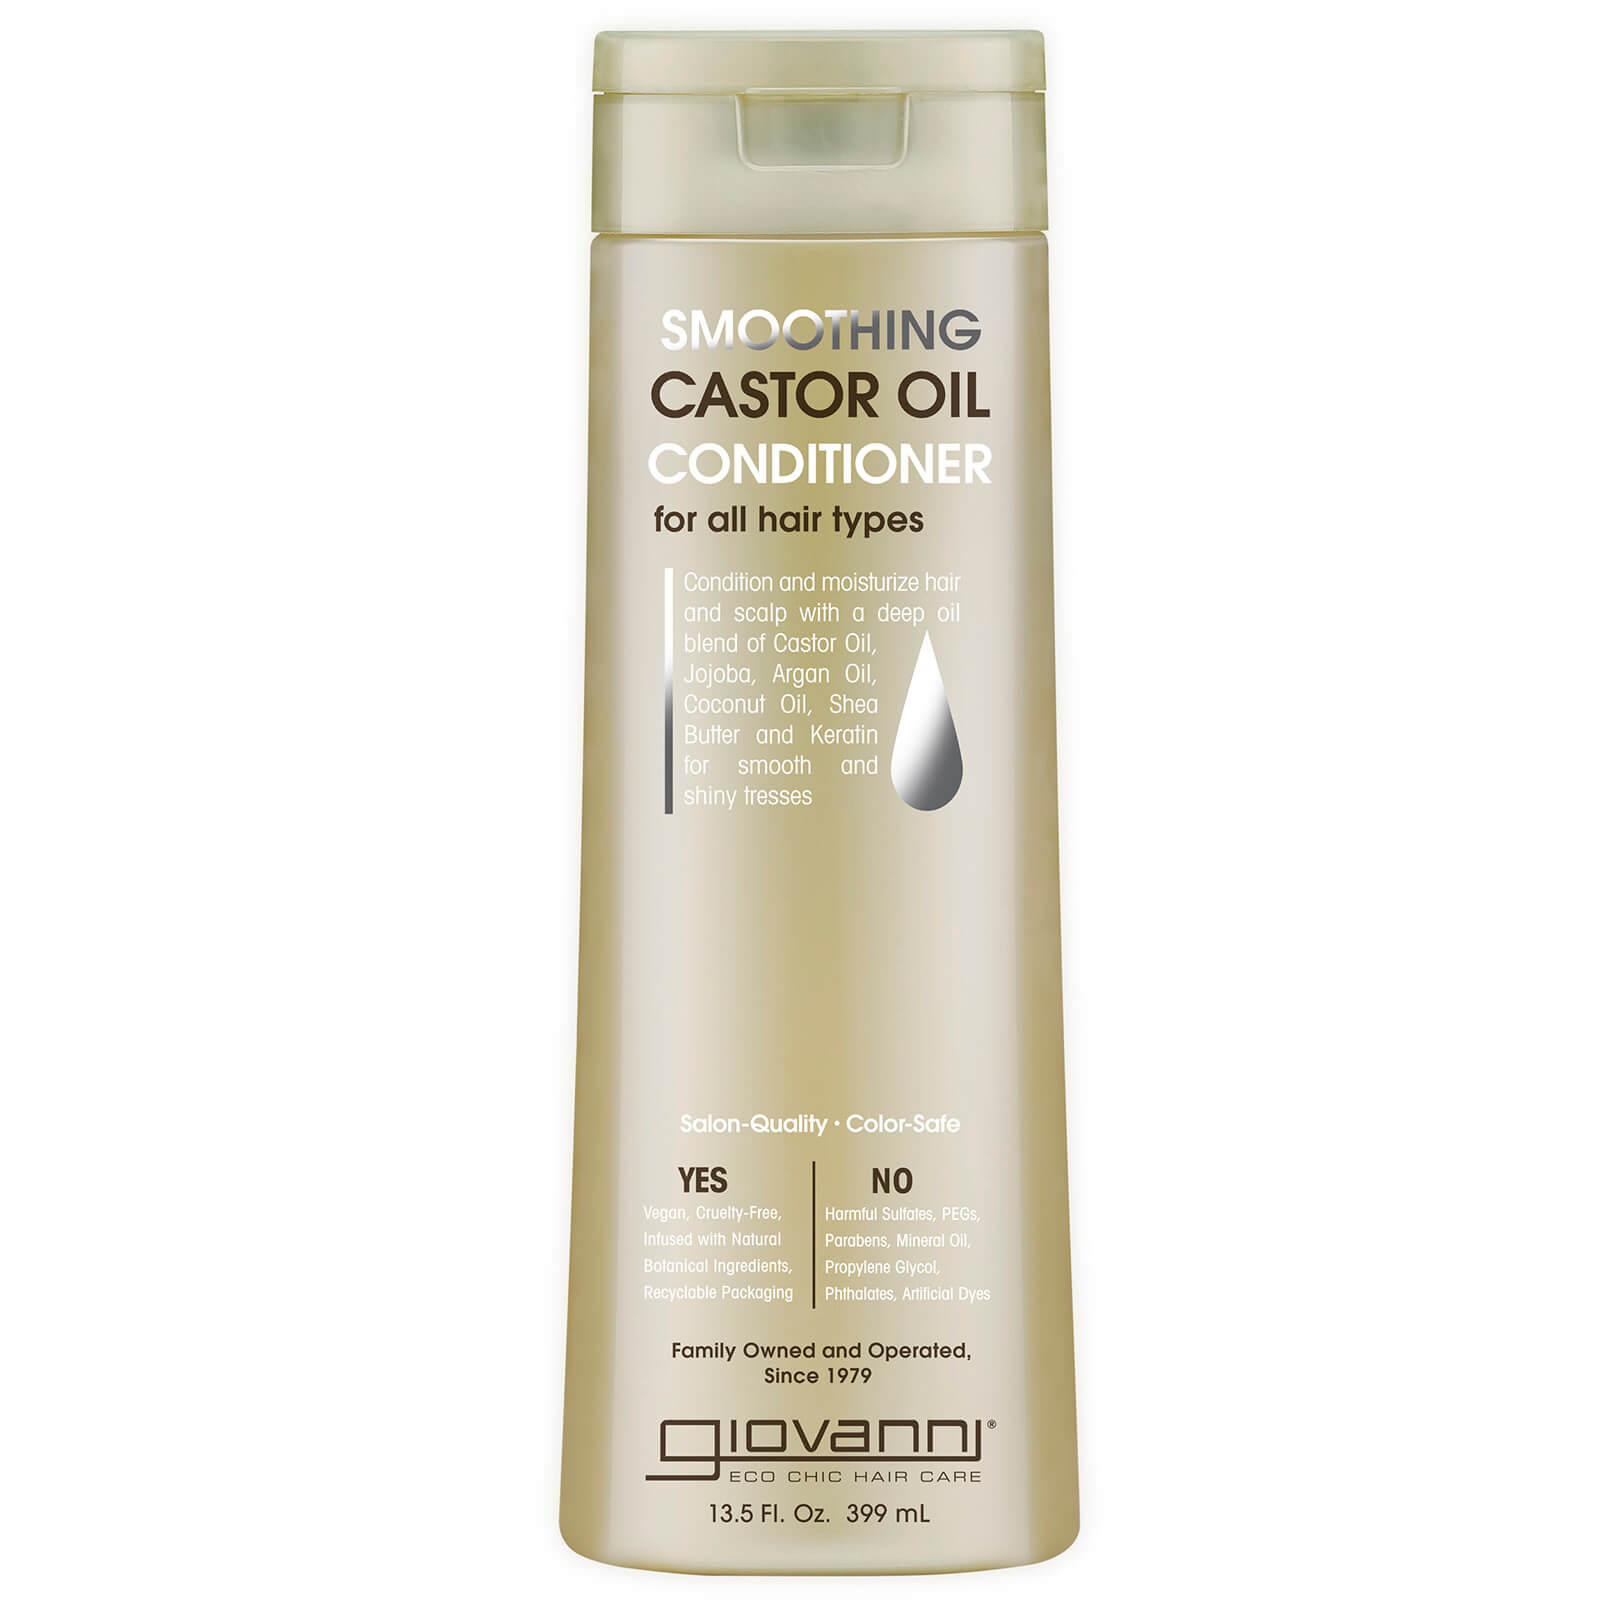 Giovanni Smoothing Caster Oil Conditioner 399ml